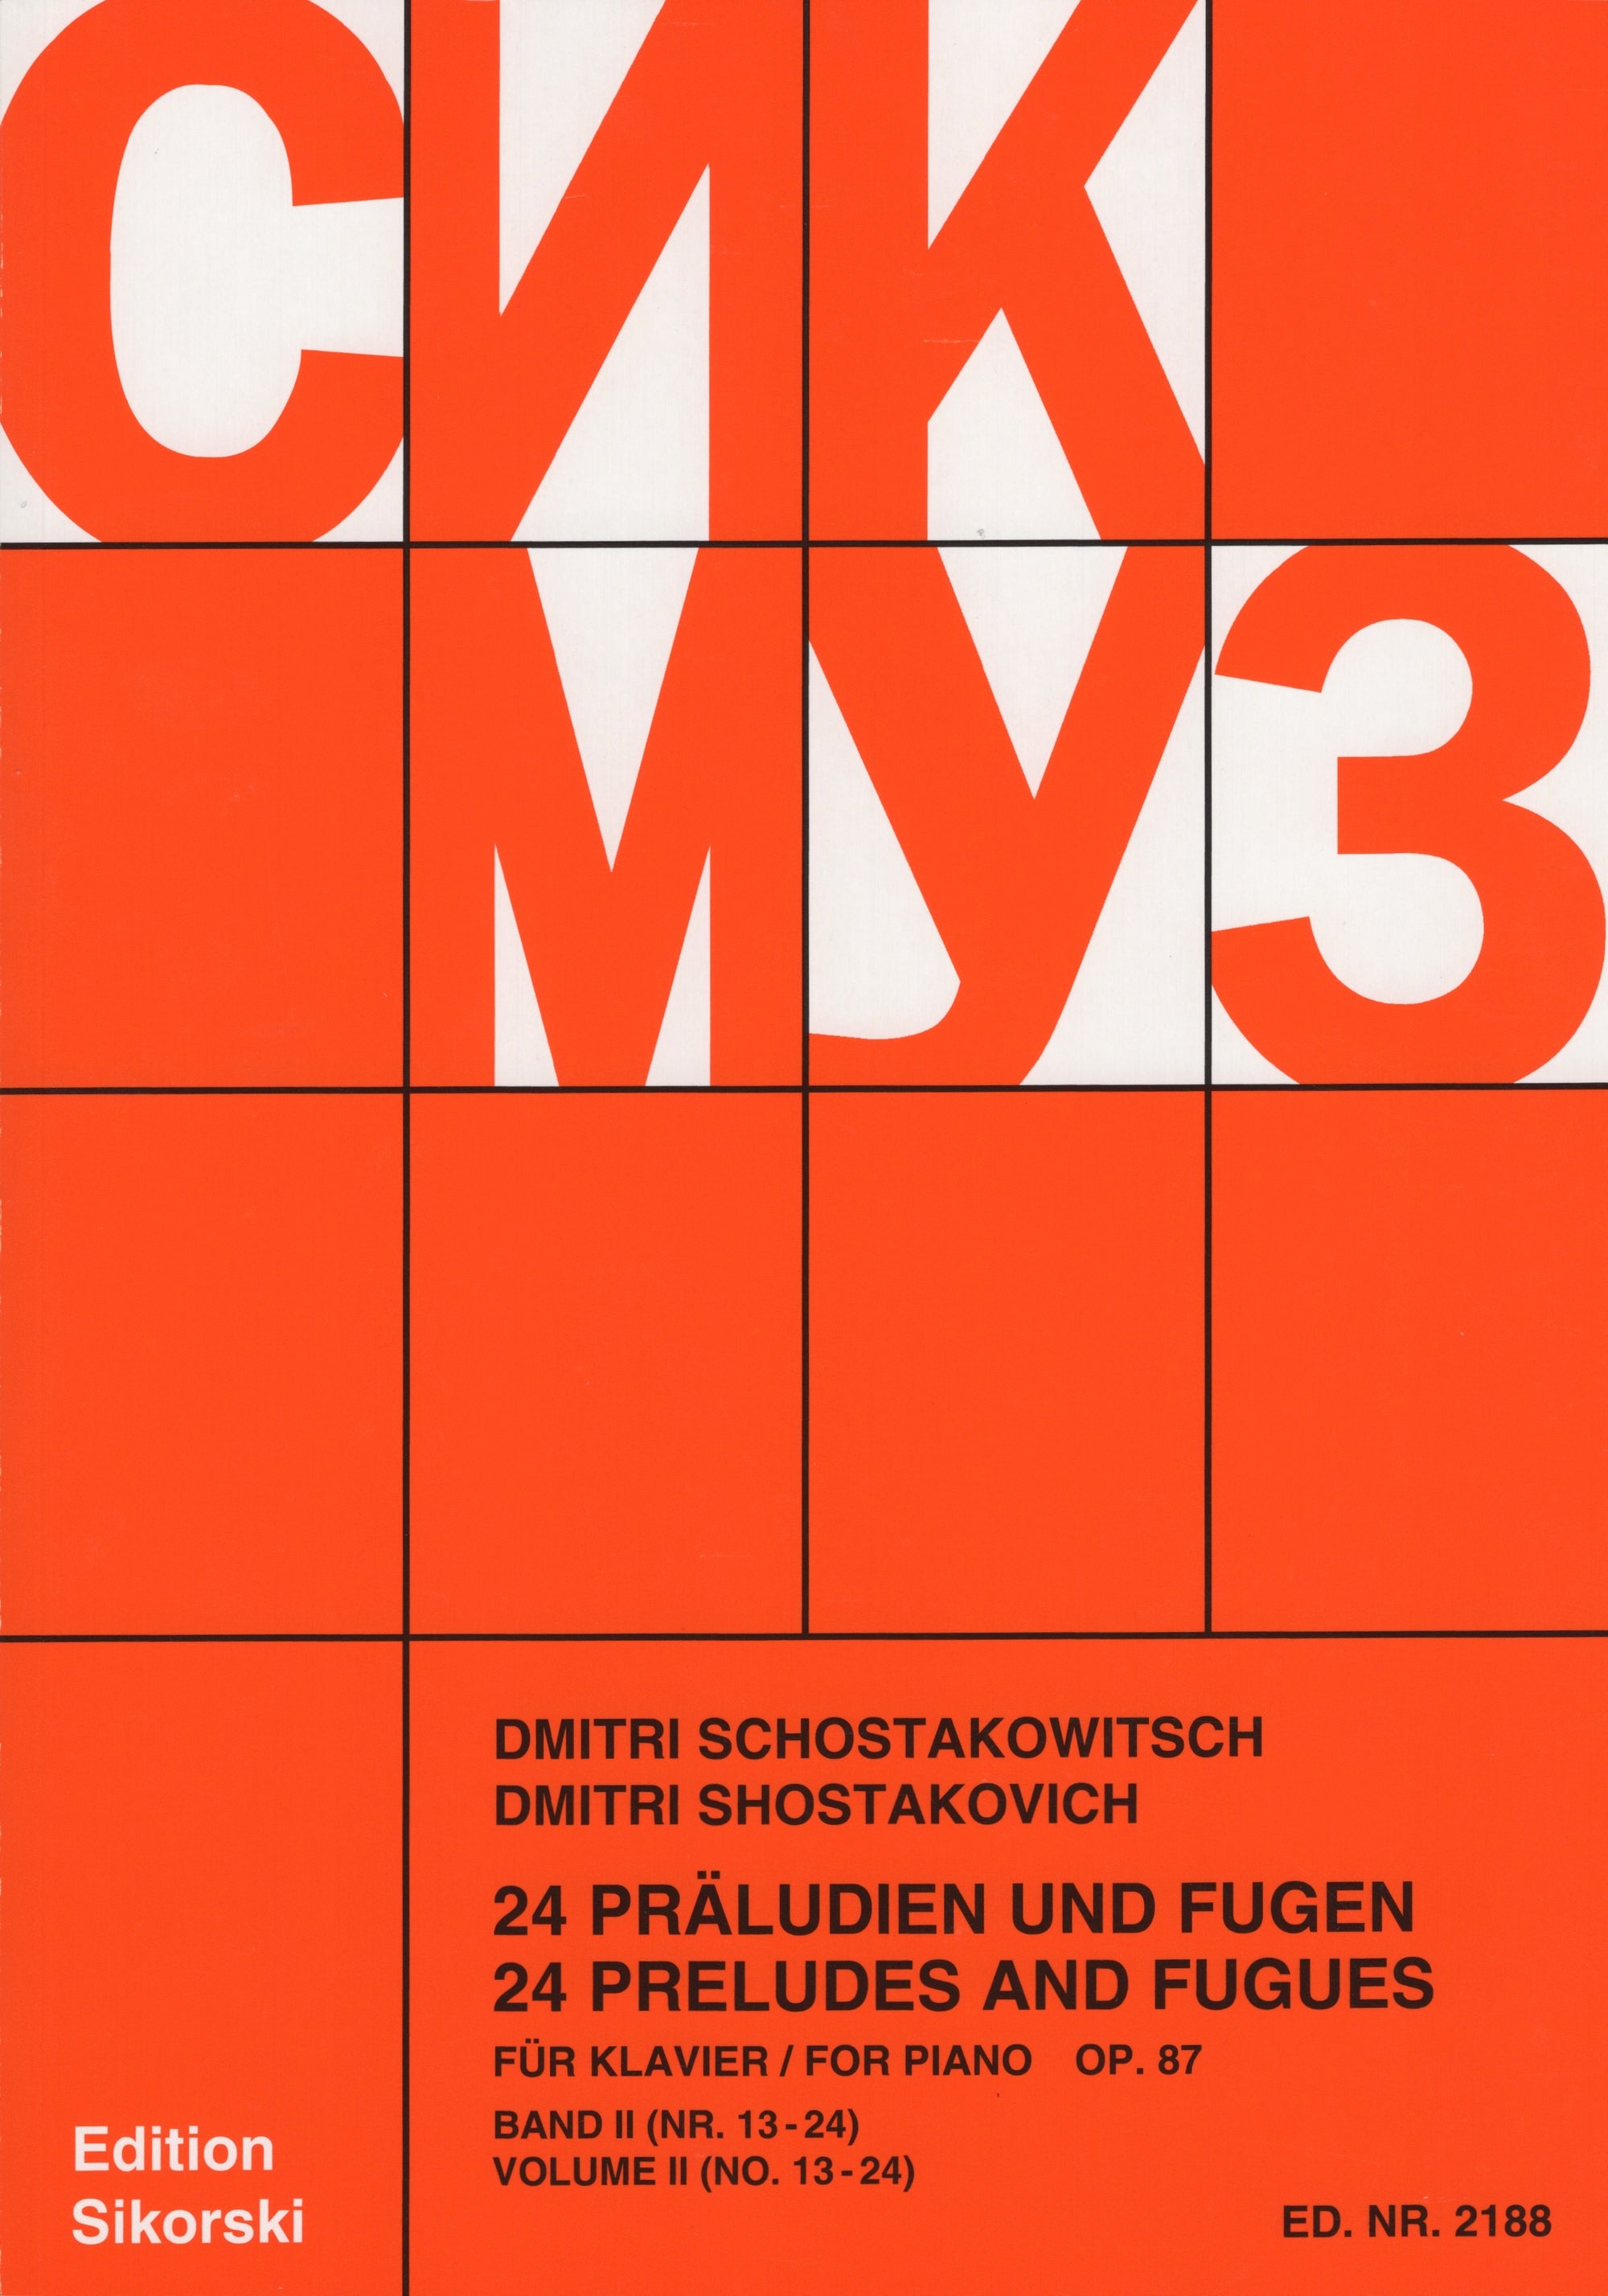 Shostakovich: 24 Preludes and Fugues, Op. 87 - Volume 2 (Nos. 13-24)